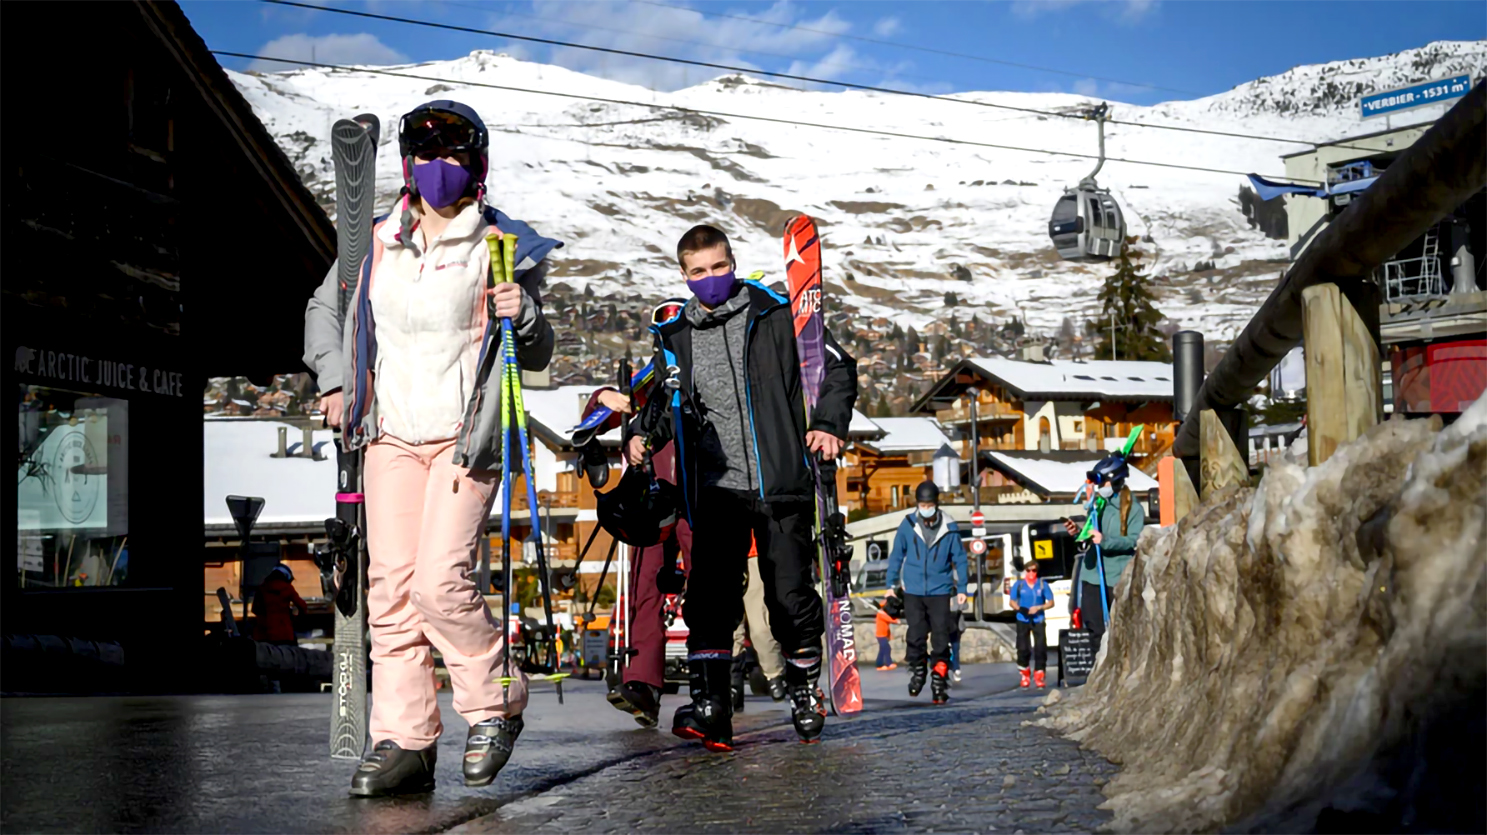 Forced into a ten-day quarantine in the Swiss Ski Resort of Verbier, hundreds of British tourists escaped under cover of night.